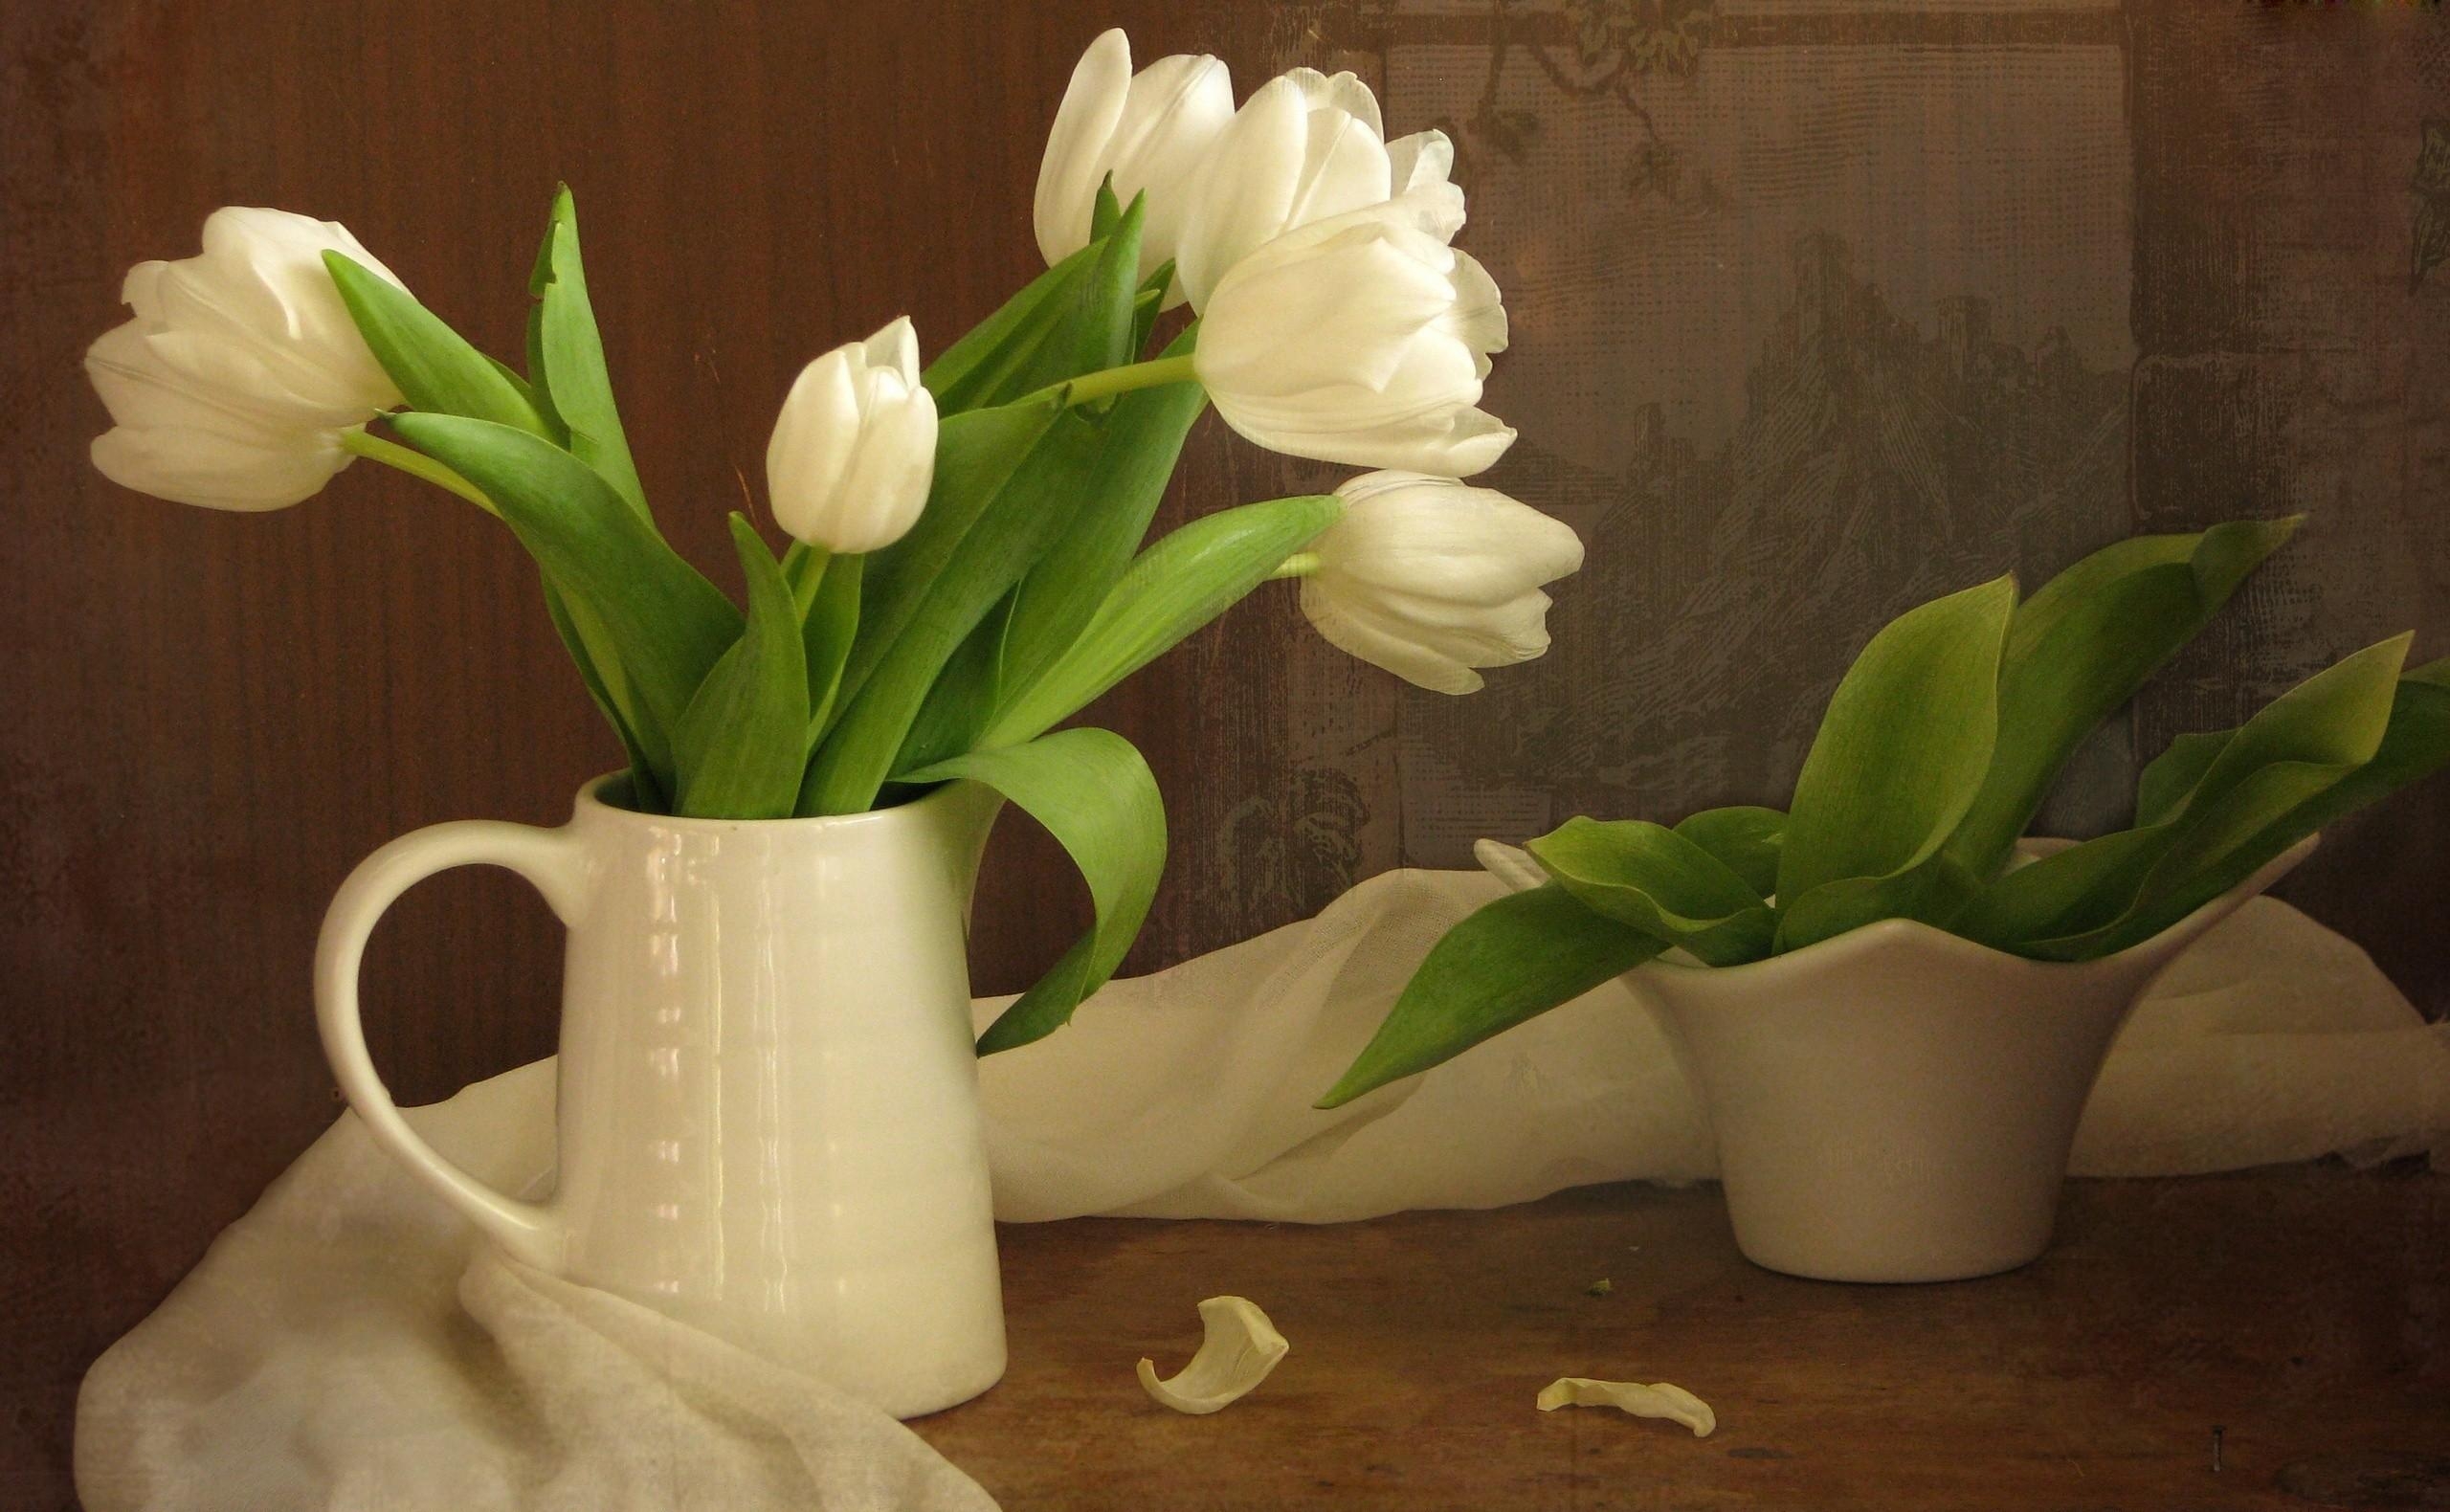 tulips, flowers, white, greens, bouquet, jug, snow white, scarf